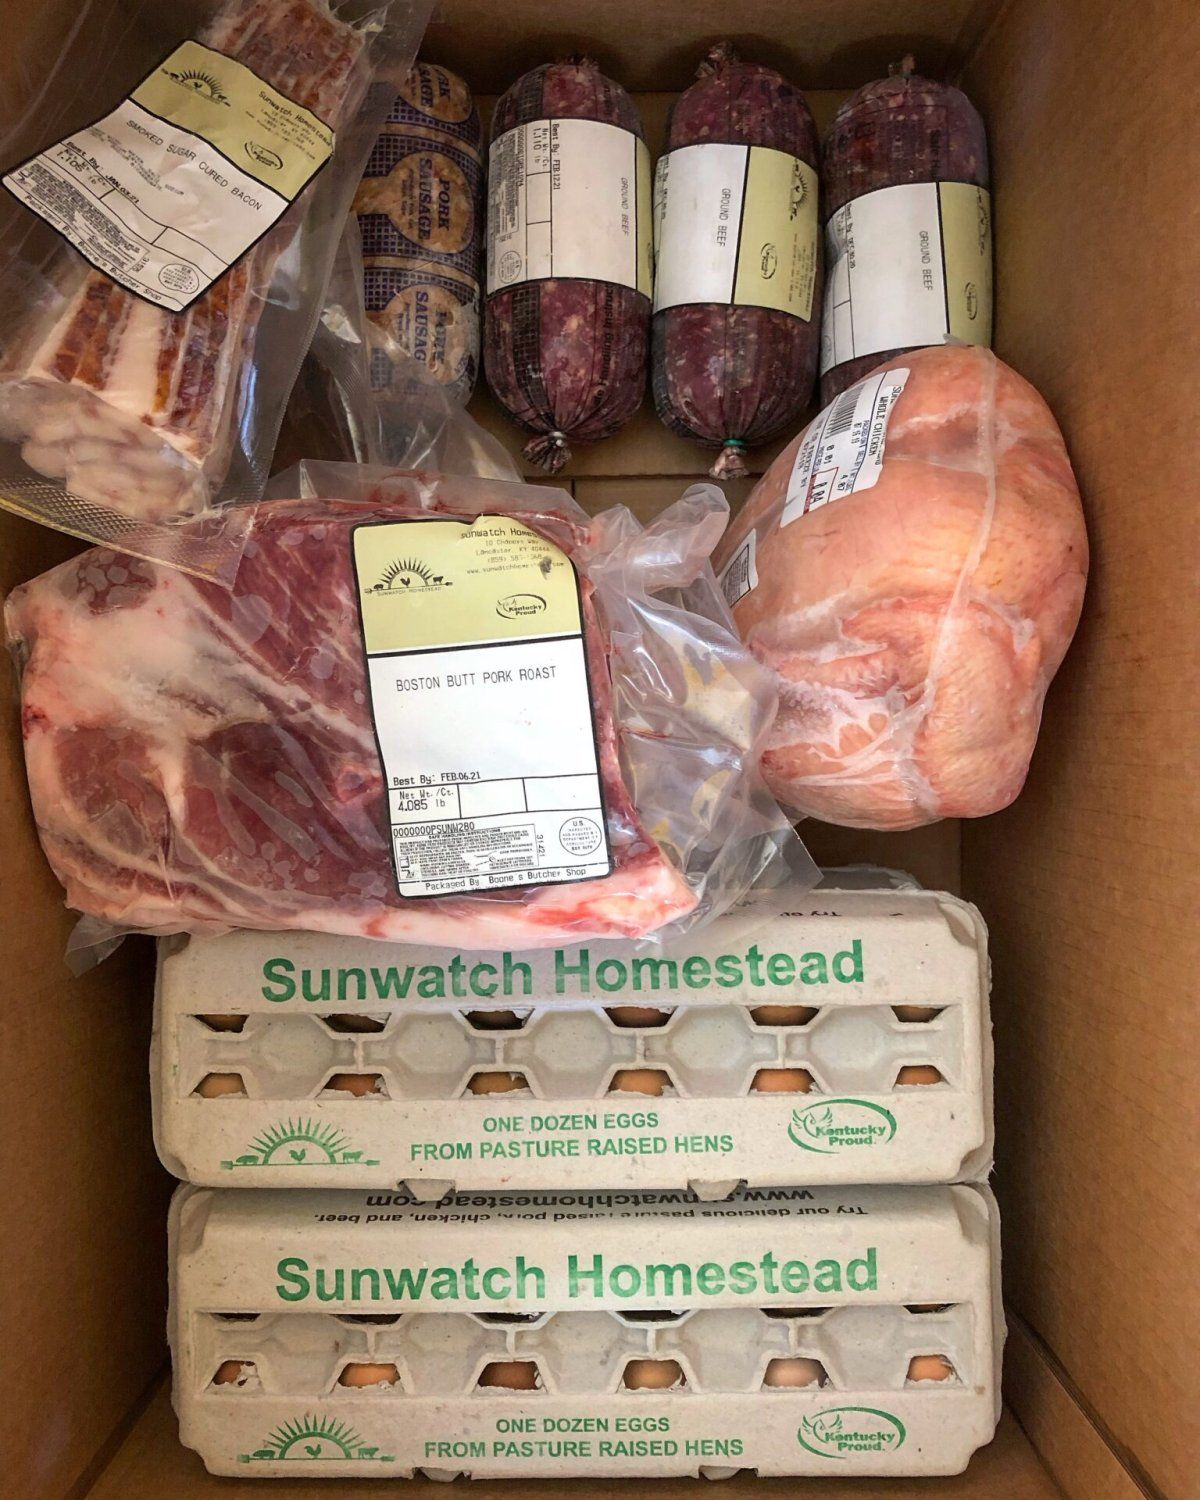 Previous Happening: Adding Meat and Eggs to your CSA share with Sunwatch Homestead